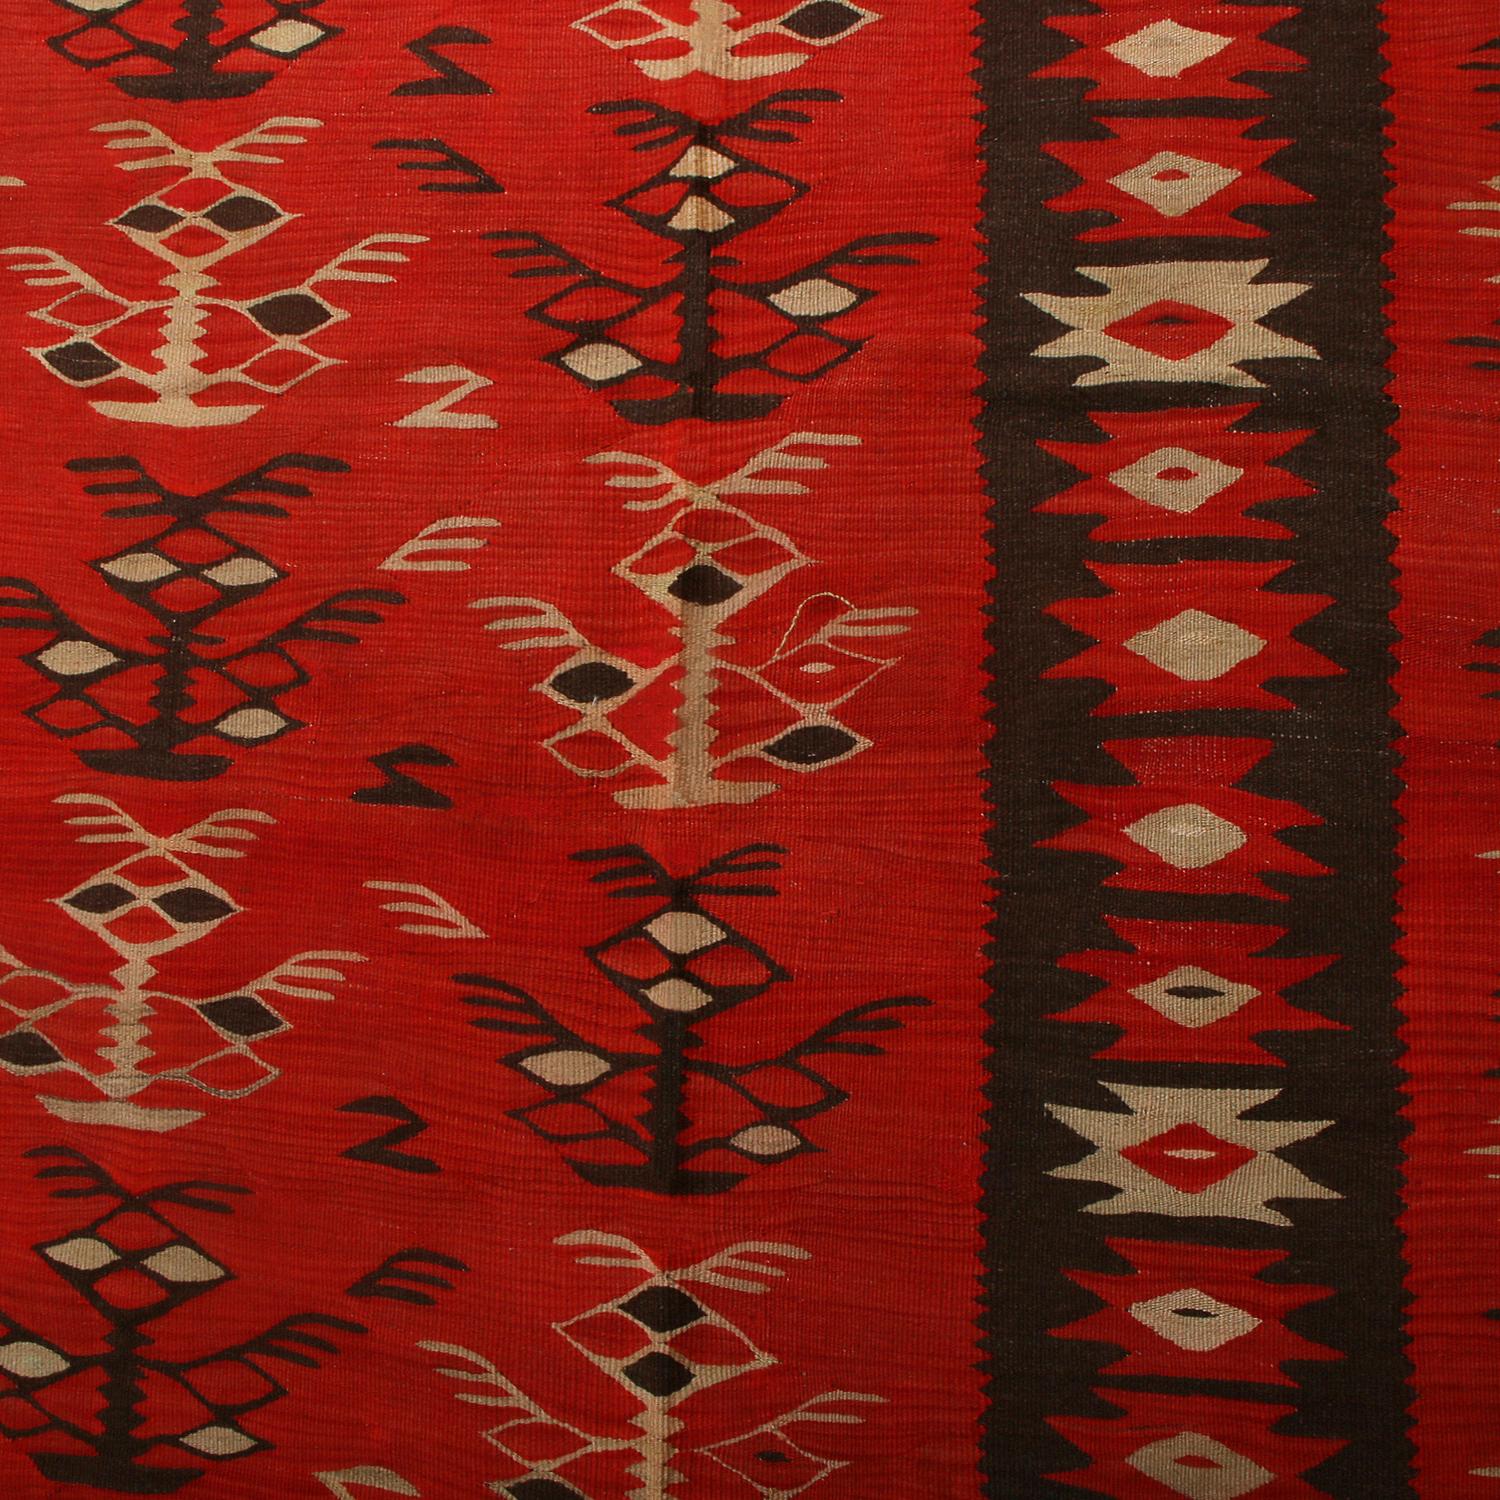 Hand-Woven Handwoven Vintage Tribal Kilim in Red Brown Geometric Patterns by Rug & Kilim For Sale